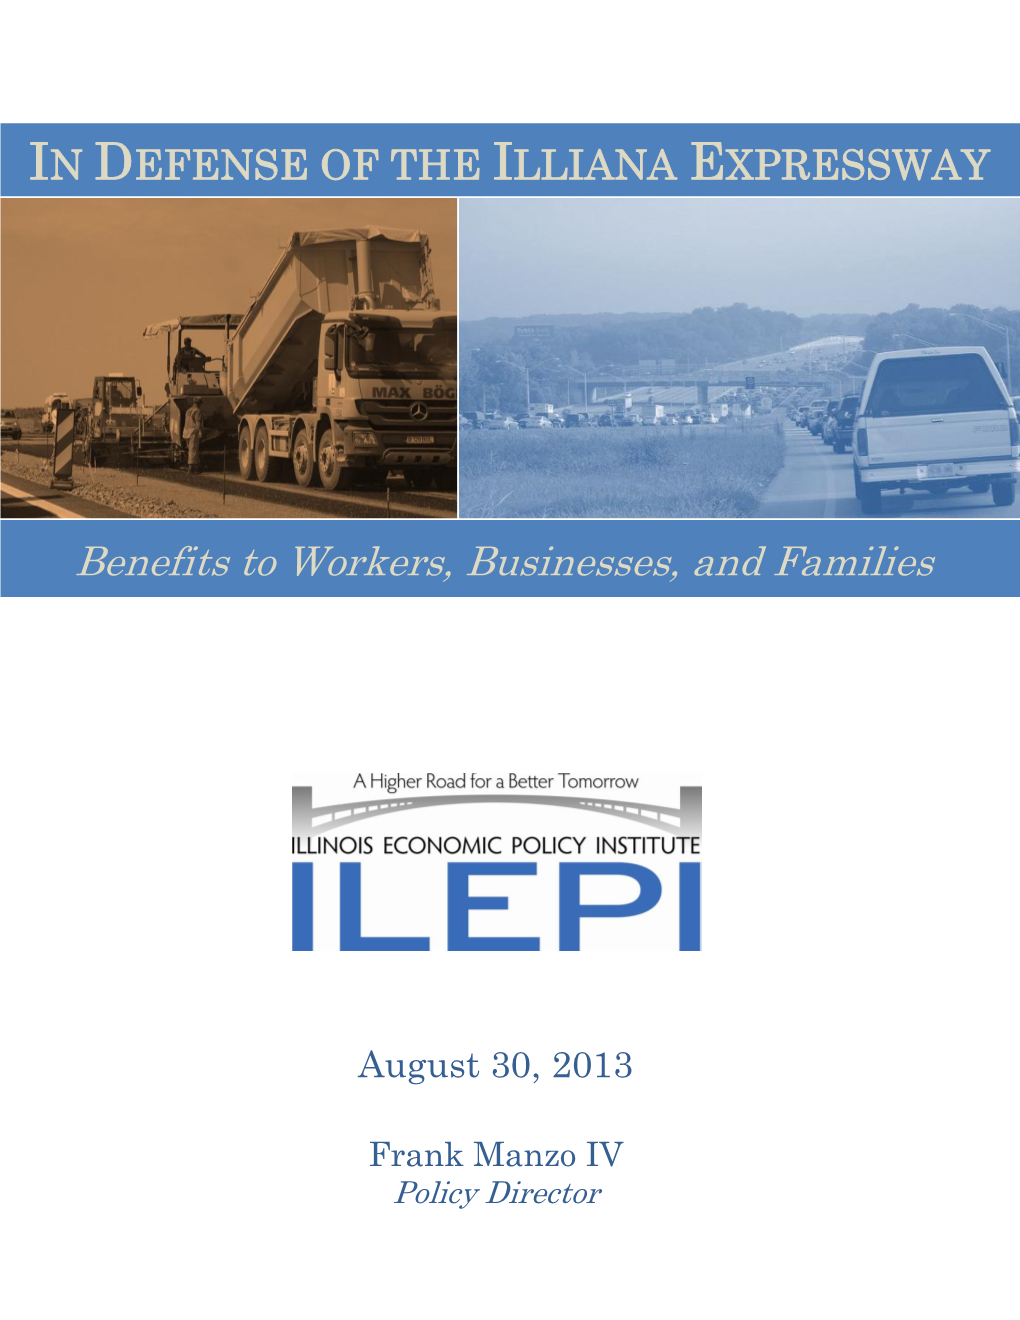 In Defense of the Illiana Expressway in D EFENSE of the ILLIANA EXPRESSWAY